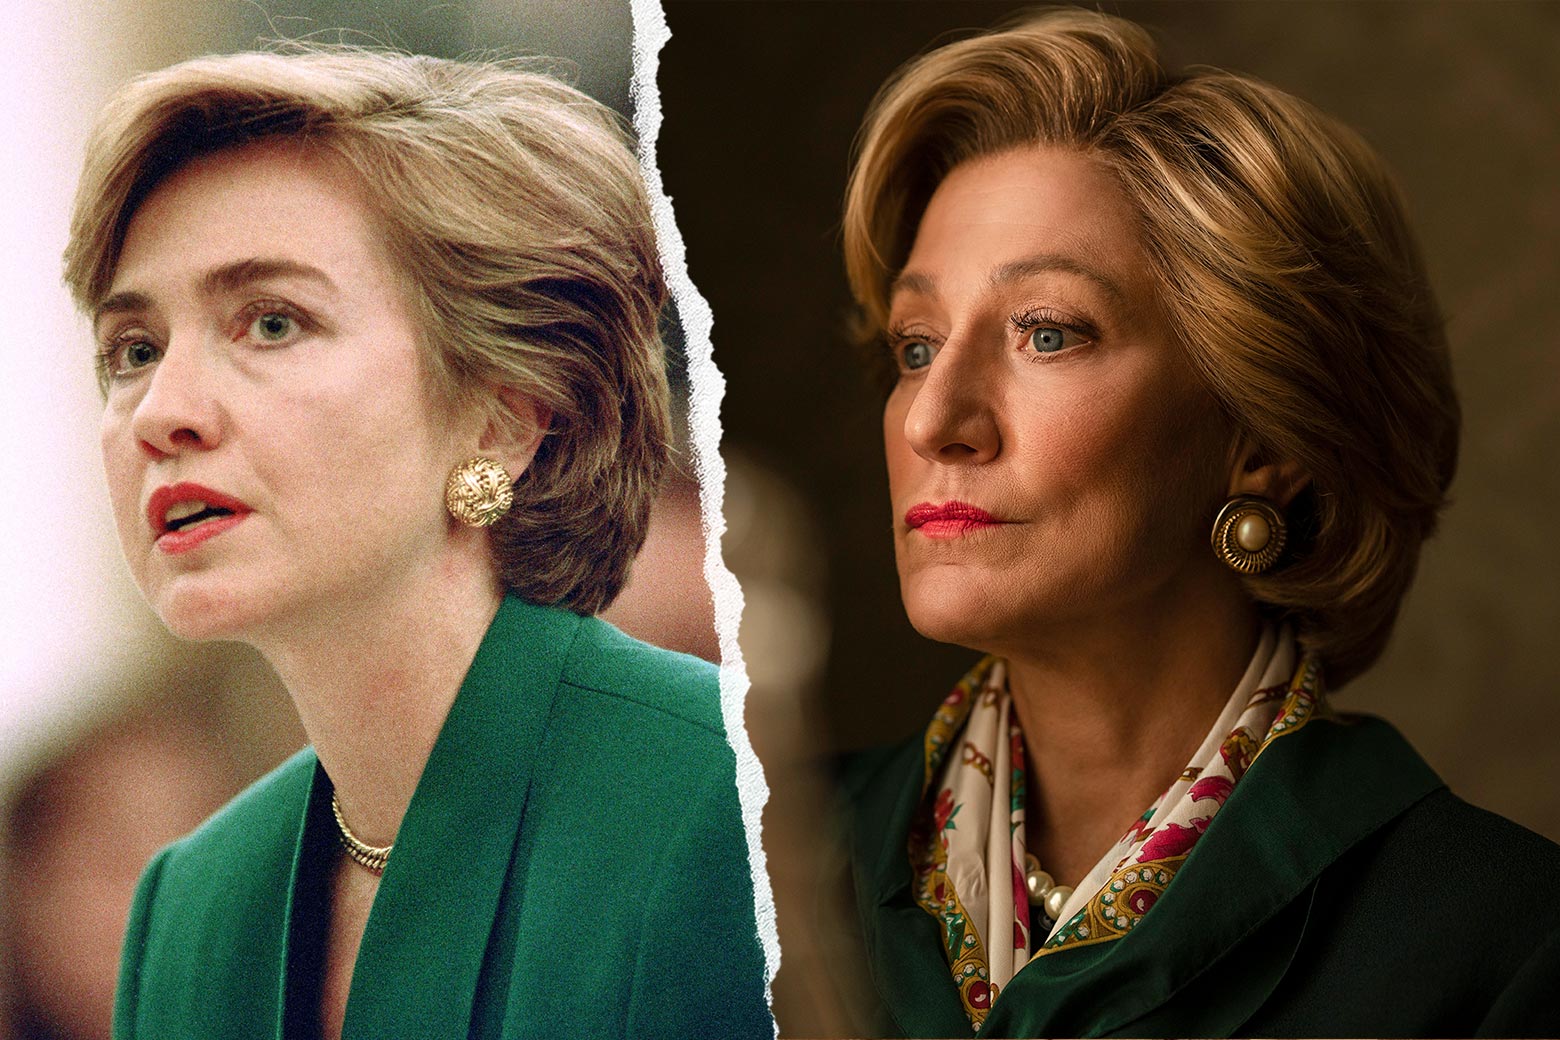 Side-by-side photos of Hillary Clinton and Edie Falco both wearing a green blazer